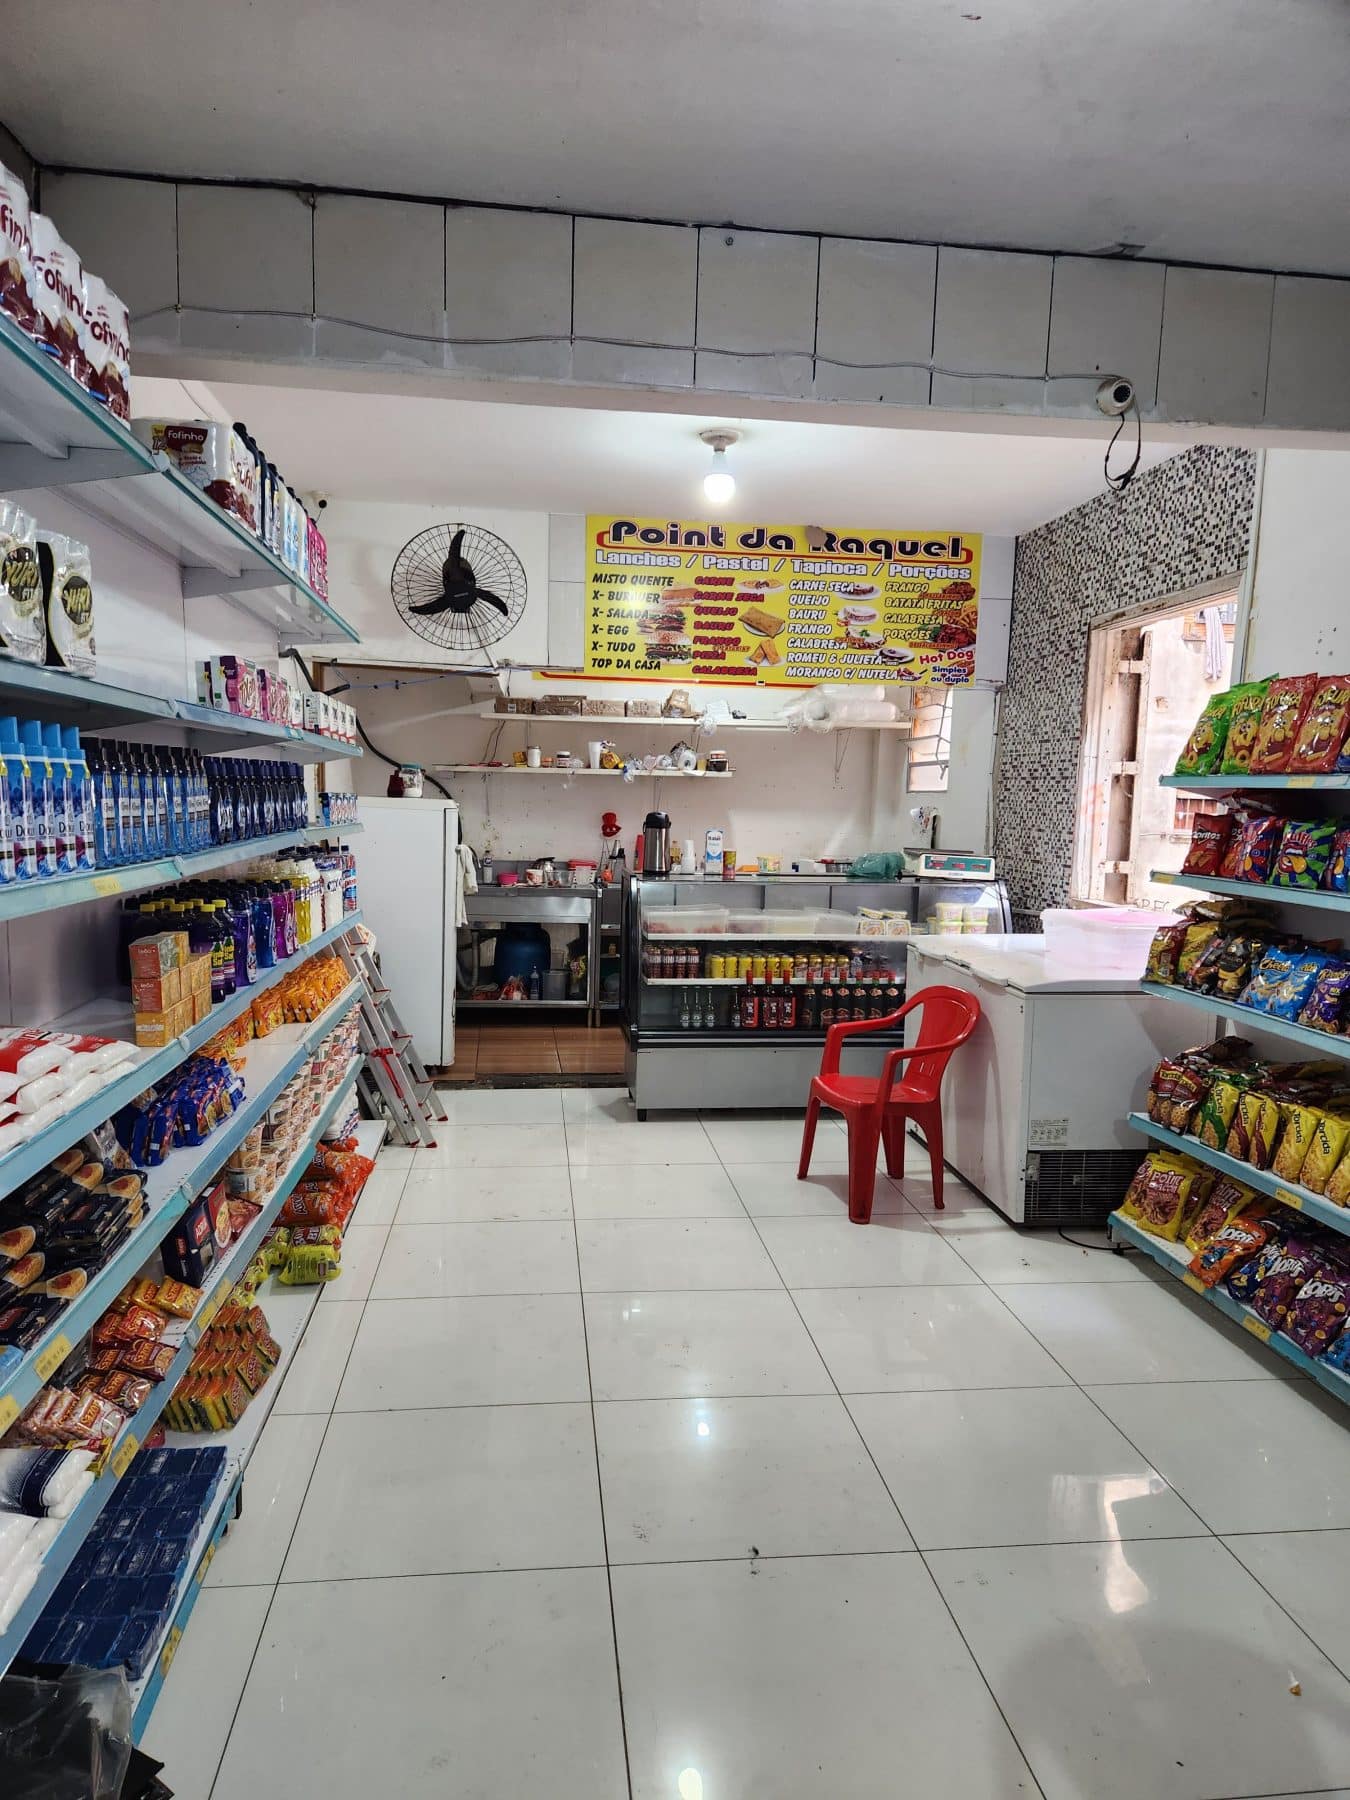 The interior of an empty convenience store. A menu at the front of the shop reads "Point da Raquel"